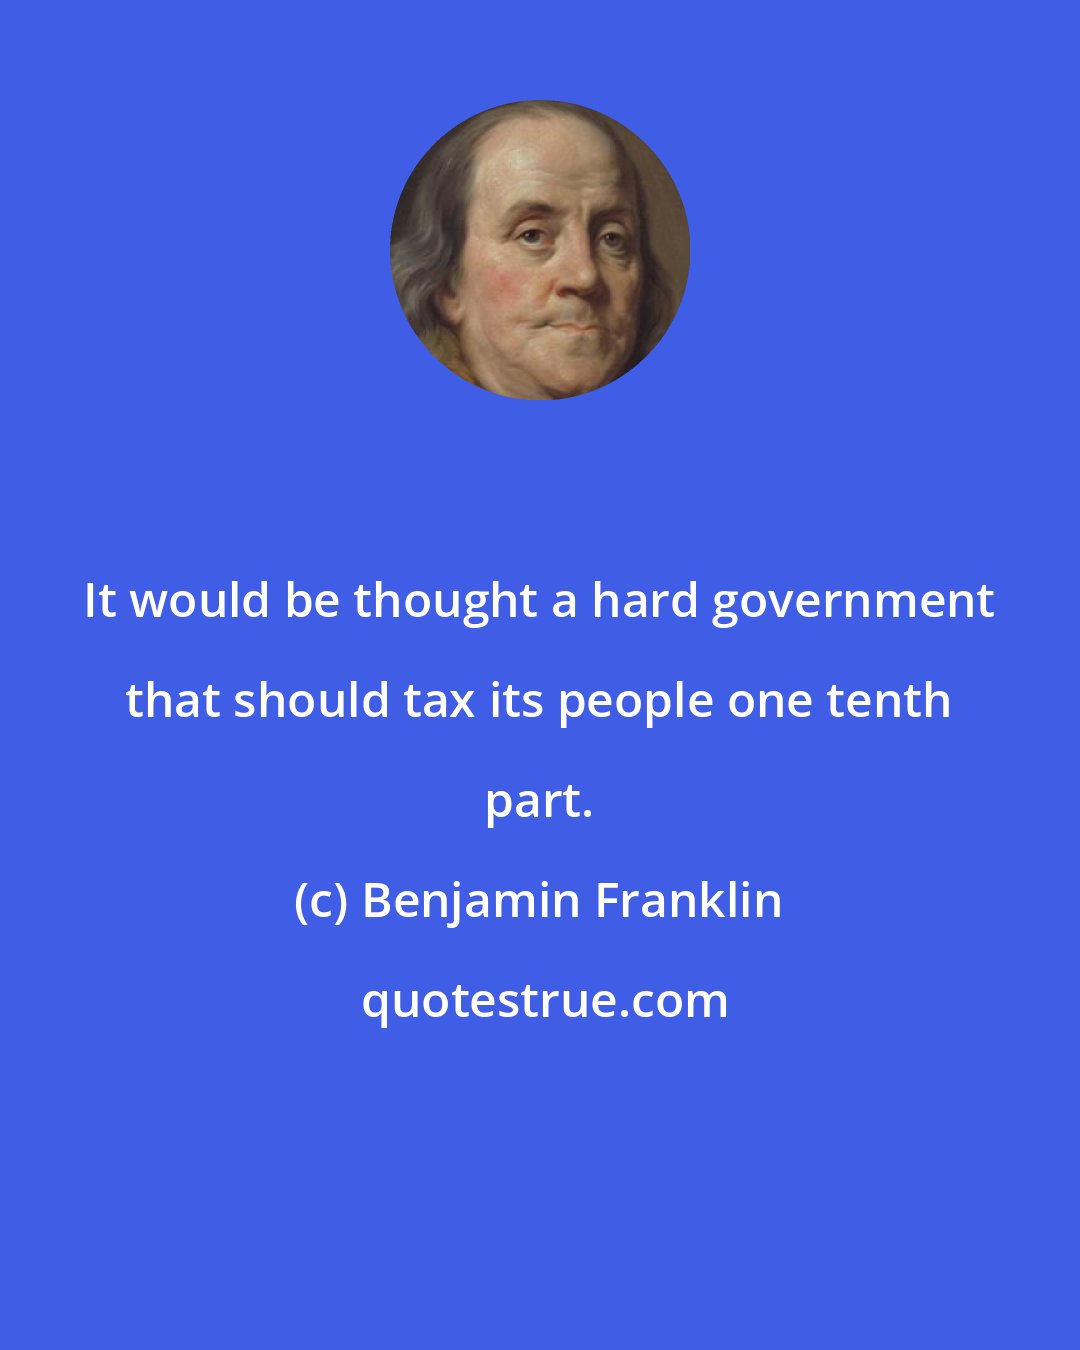 Benjamin Franklin: It would be thought a hard government that should tax its people one tenth part.